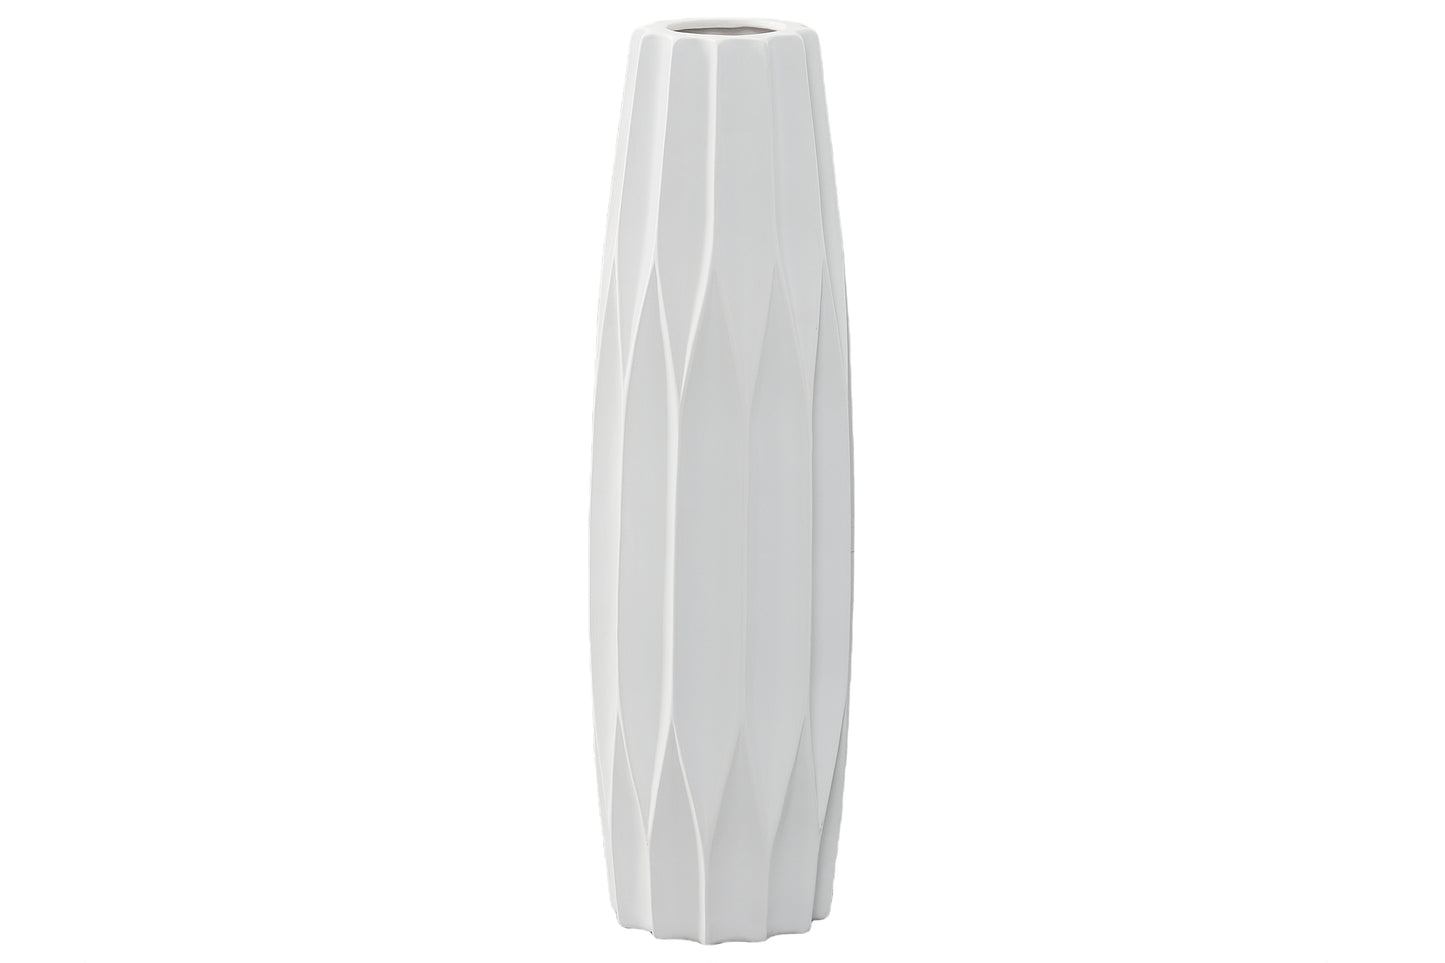 Ceramic Patterned Bellied Round Vase with Embossed Diamond Design Body and Tapered Bottom Matte Finish White